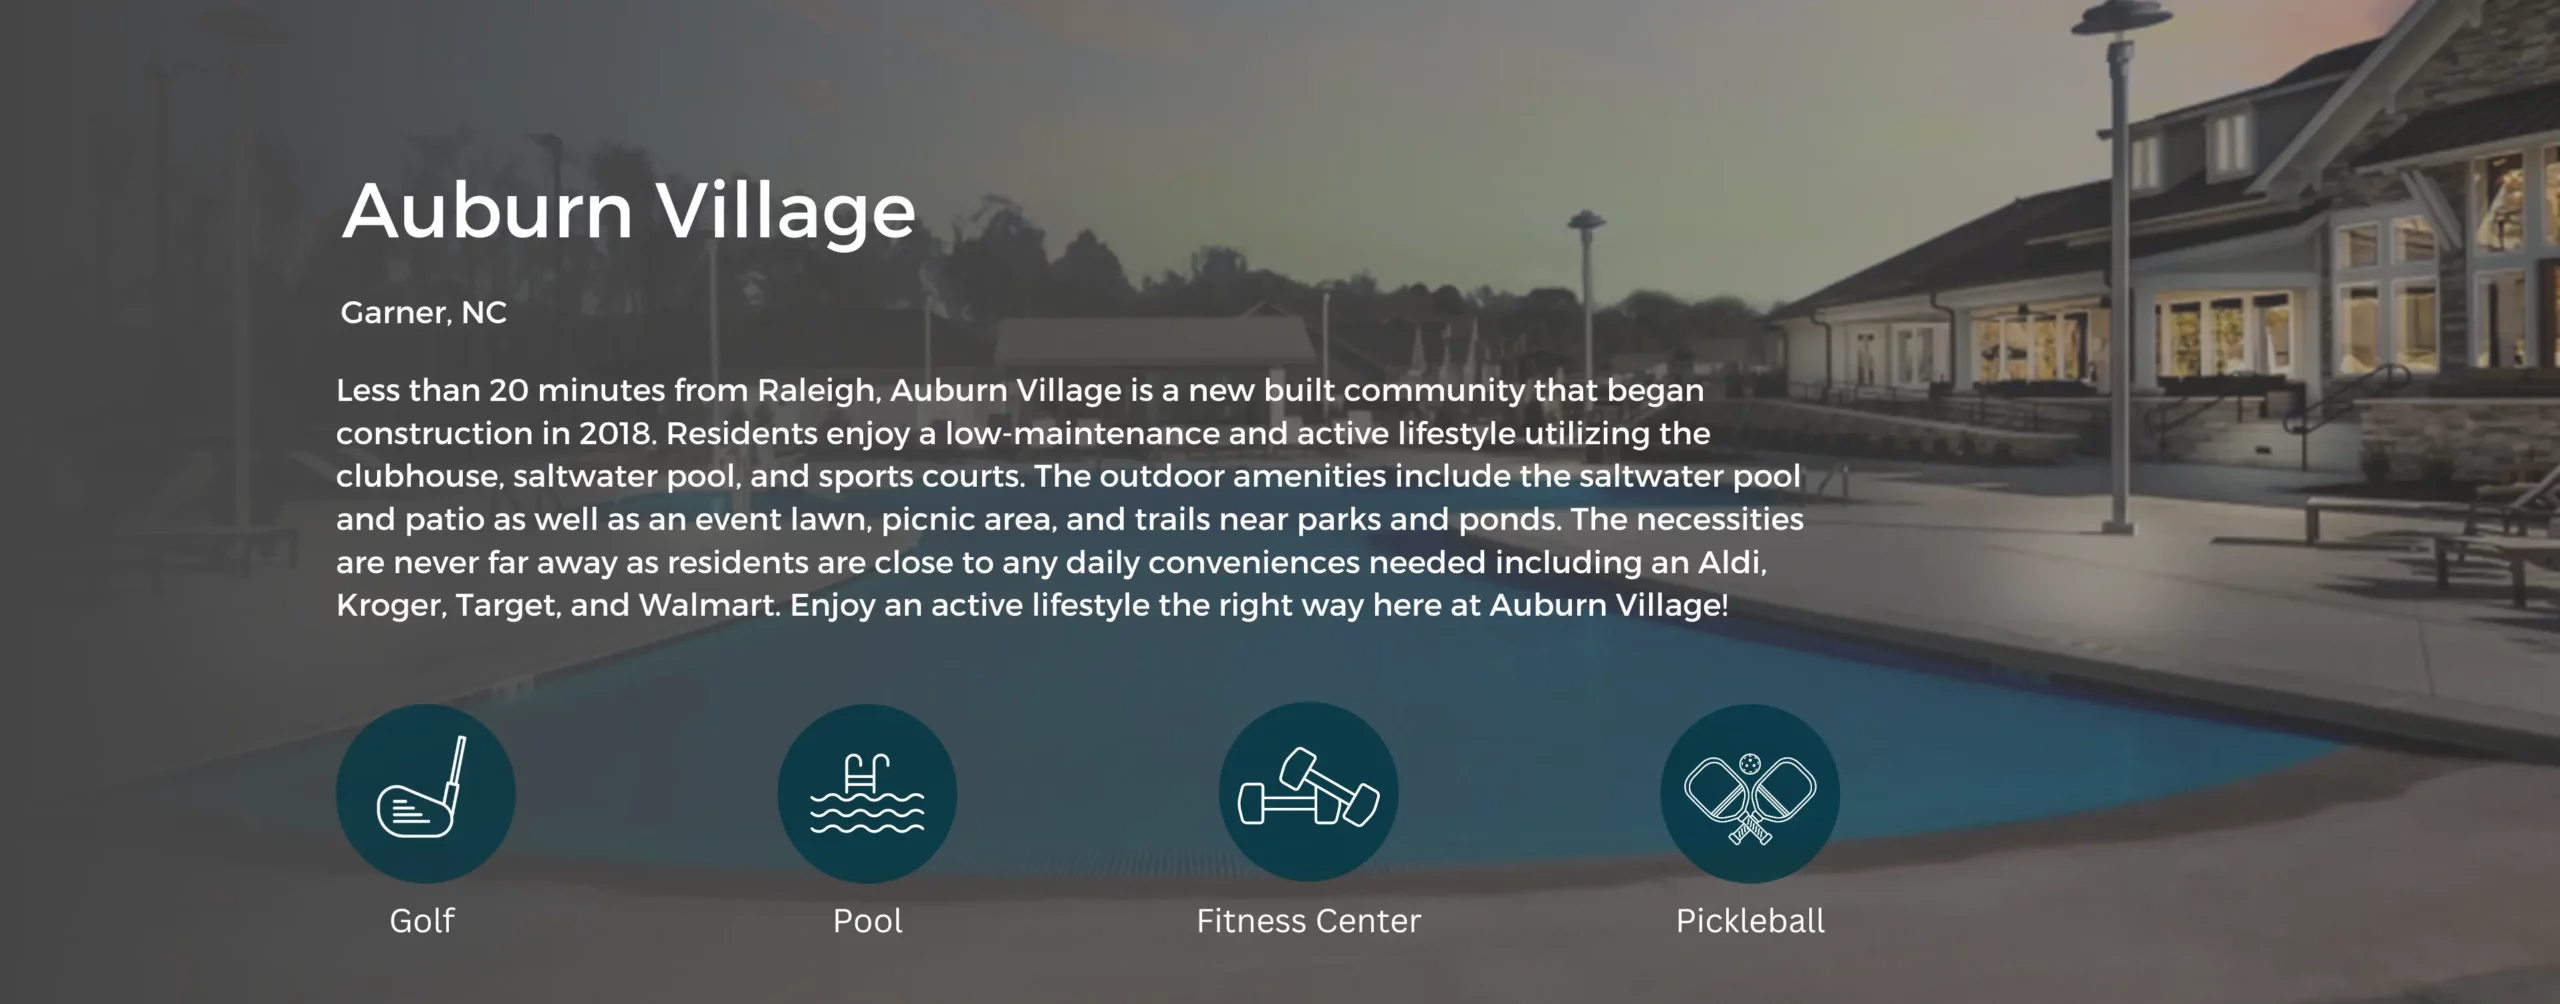 Icons that show Golf, Pool, Fitness Center, and Pickleball. Background image is an outdoor pool.